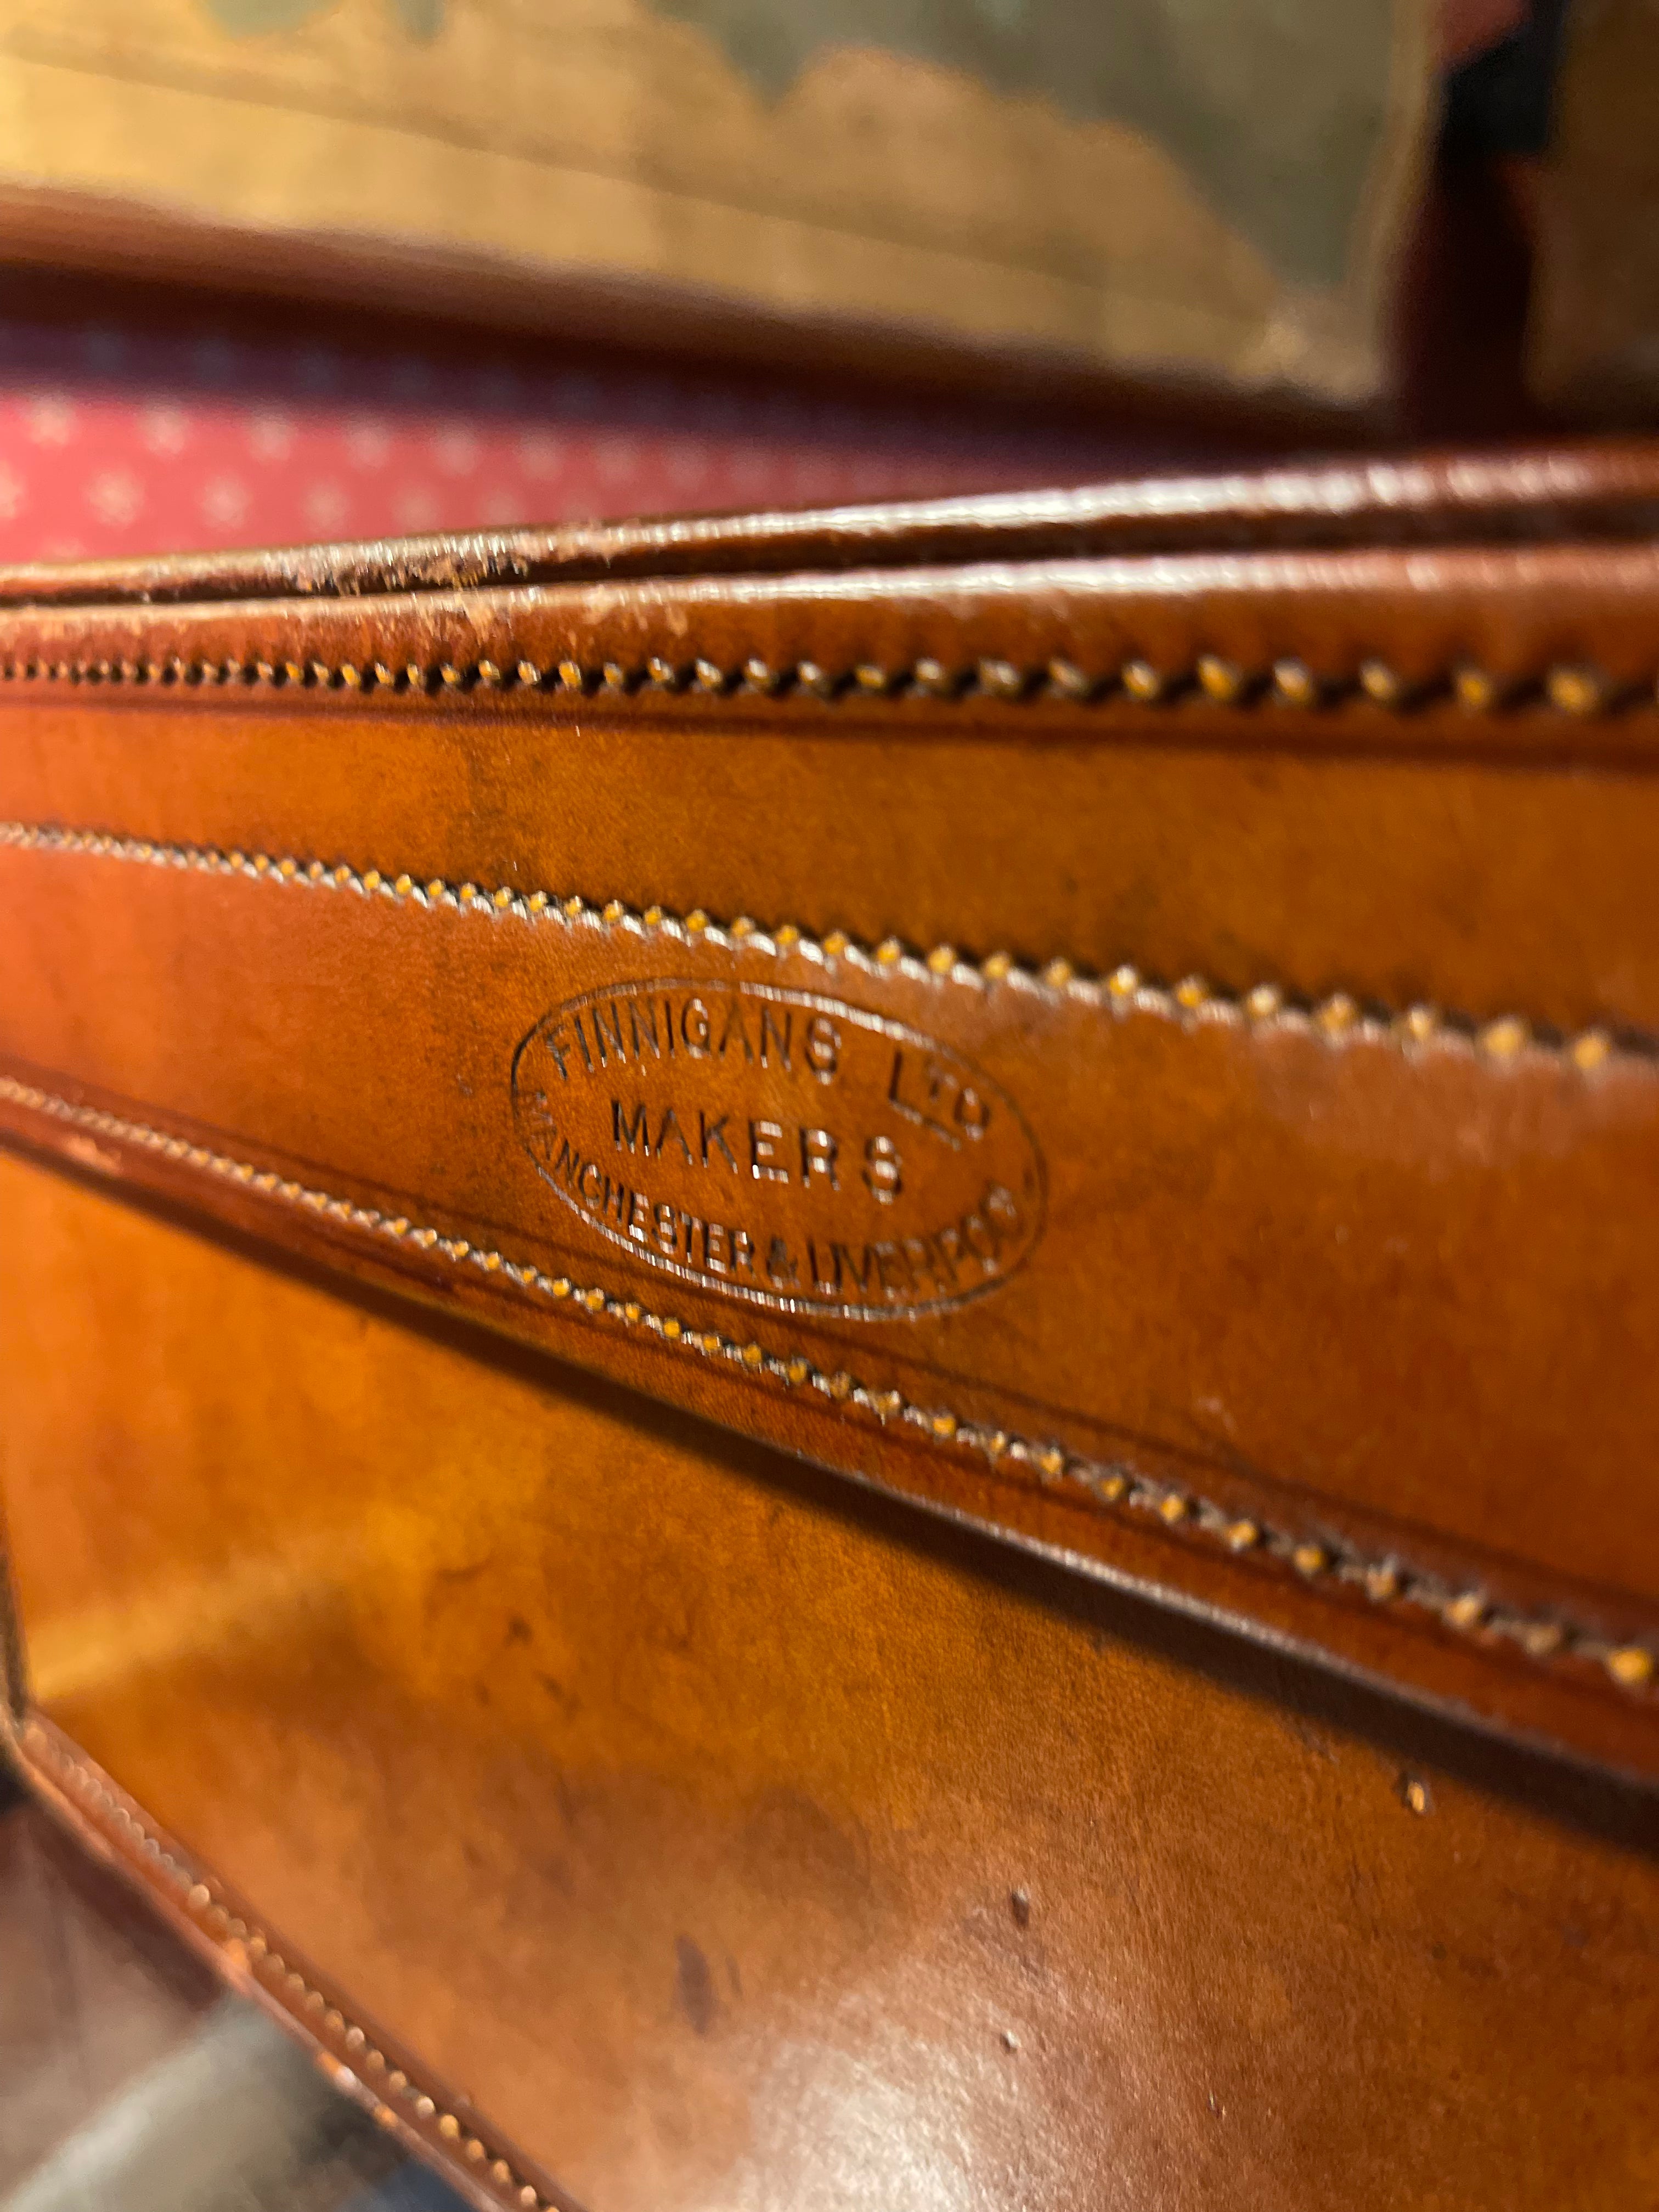 Finnigans leather luggage